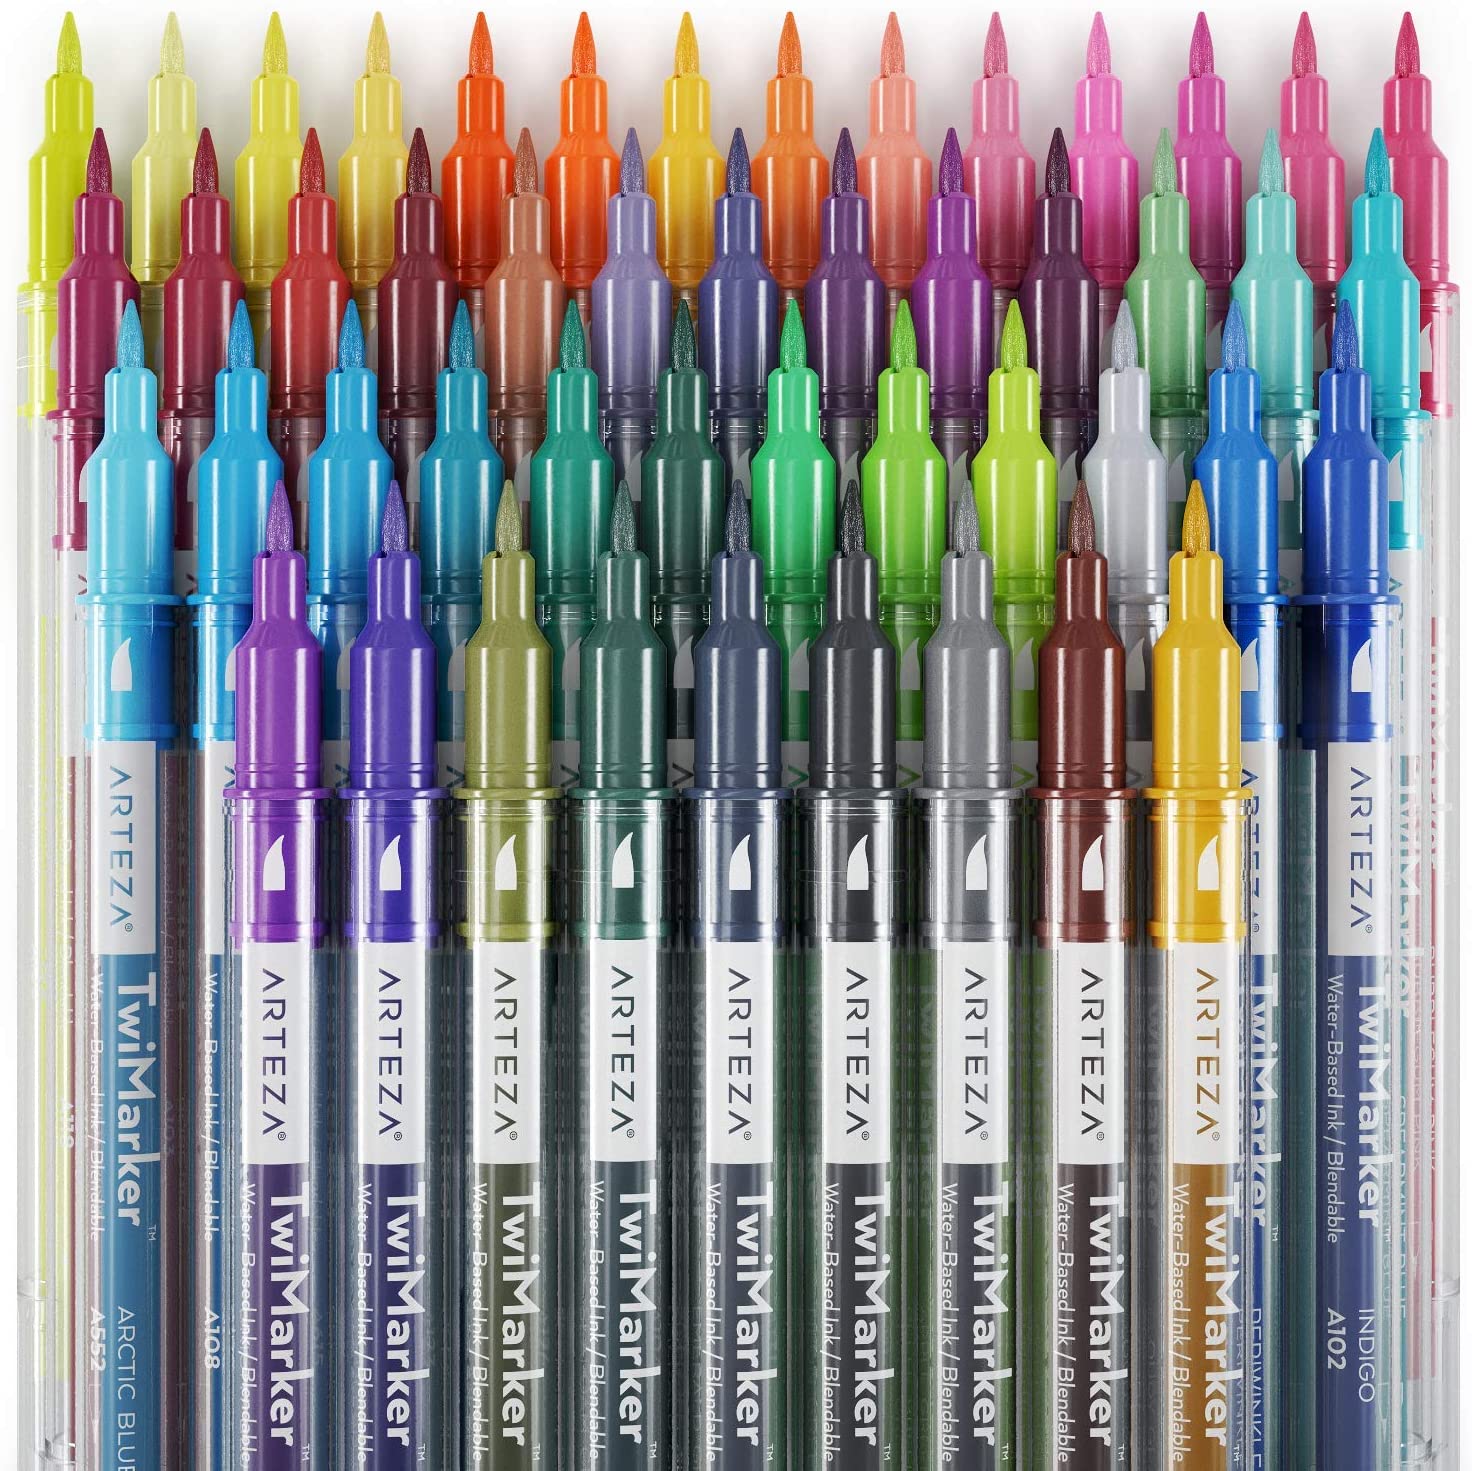 Dual-Tip Blendable Markers Set, 30-Count